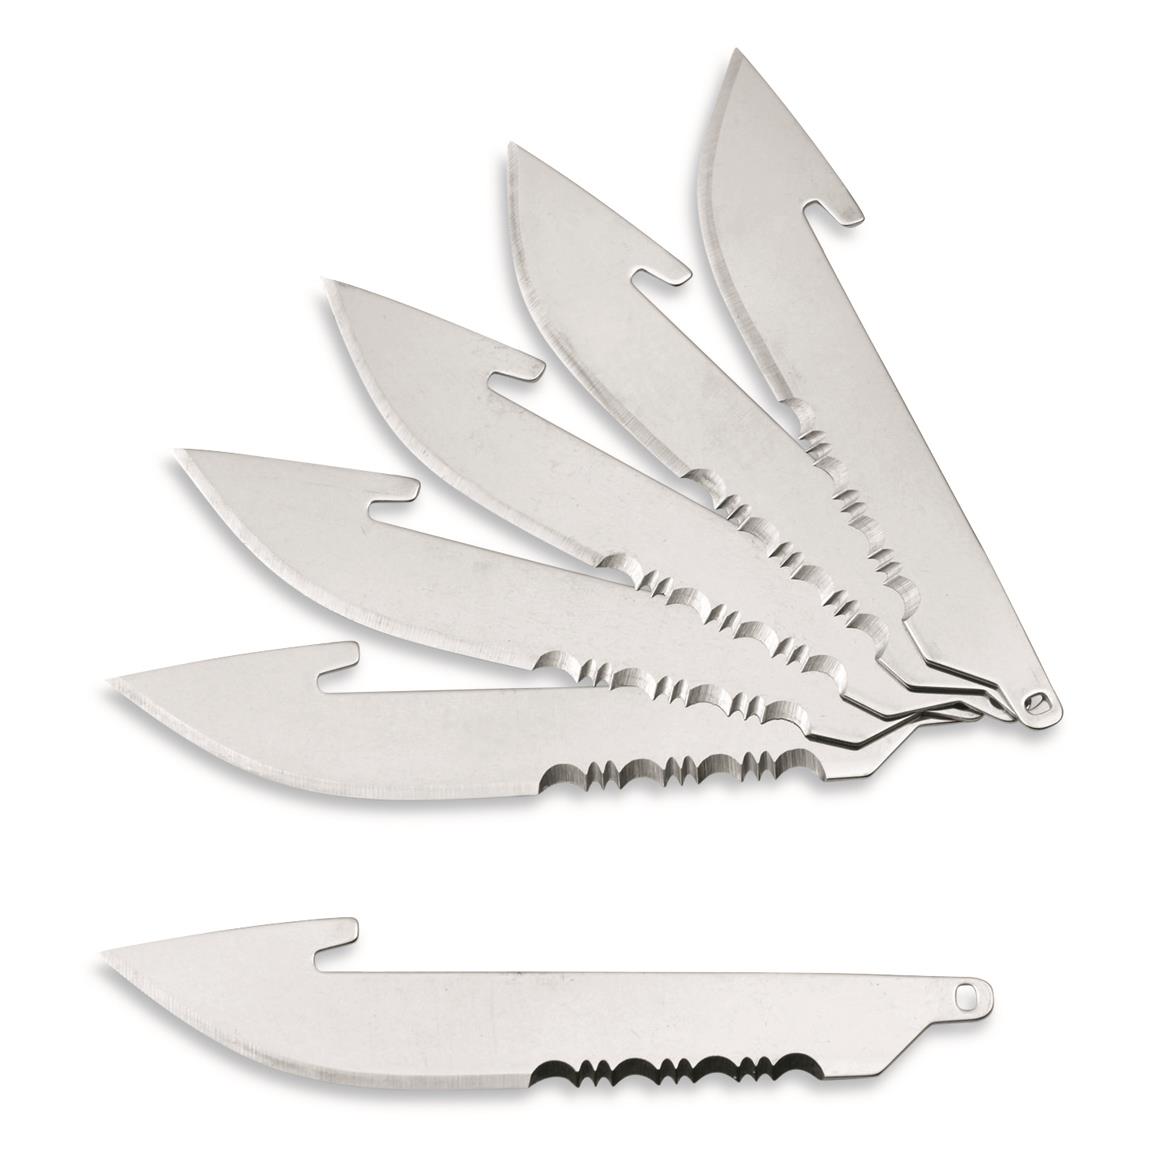 Outdoor Edge 3" Half Serrated Drop-point Blade Pack, Stainless, 6 Pack